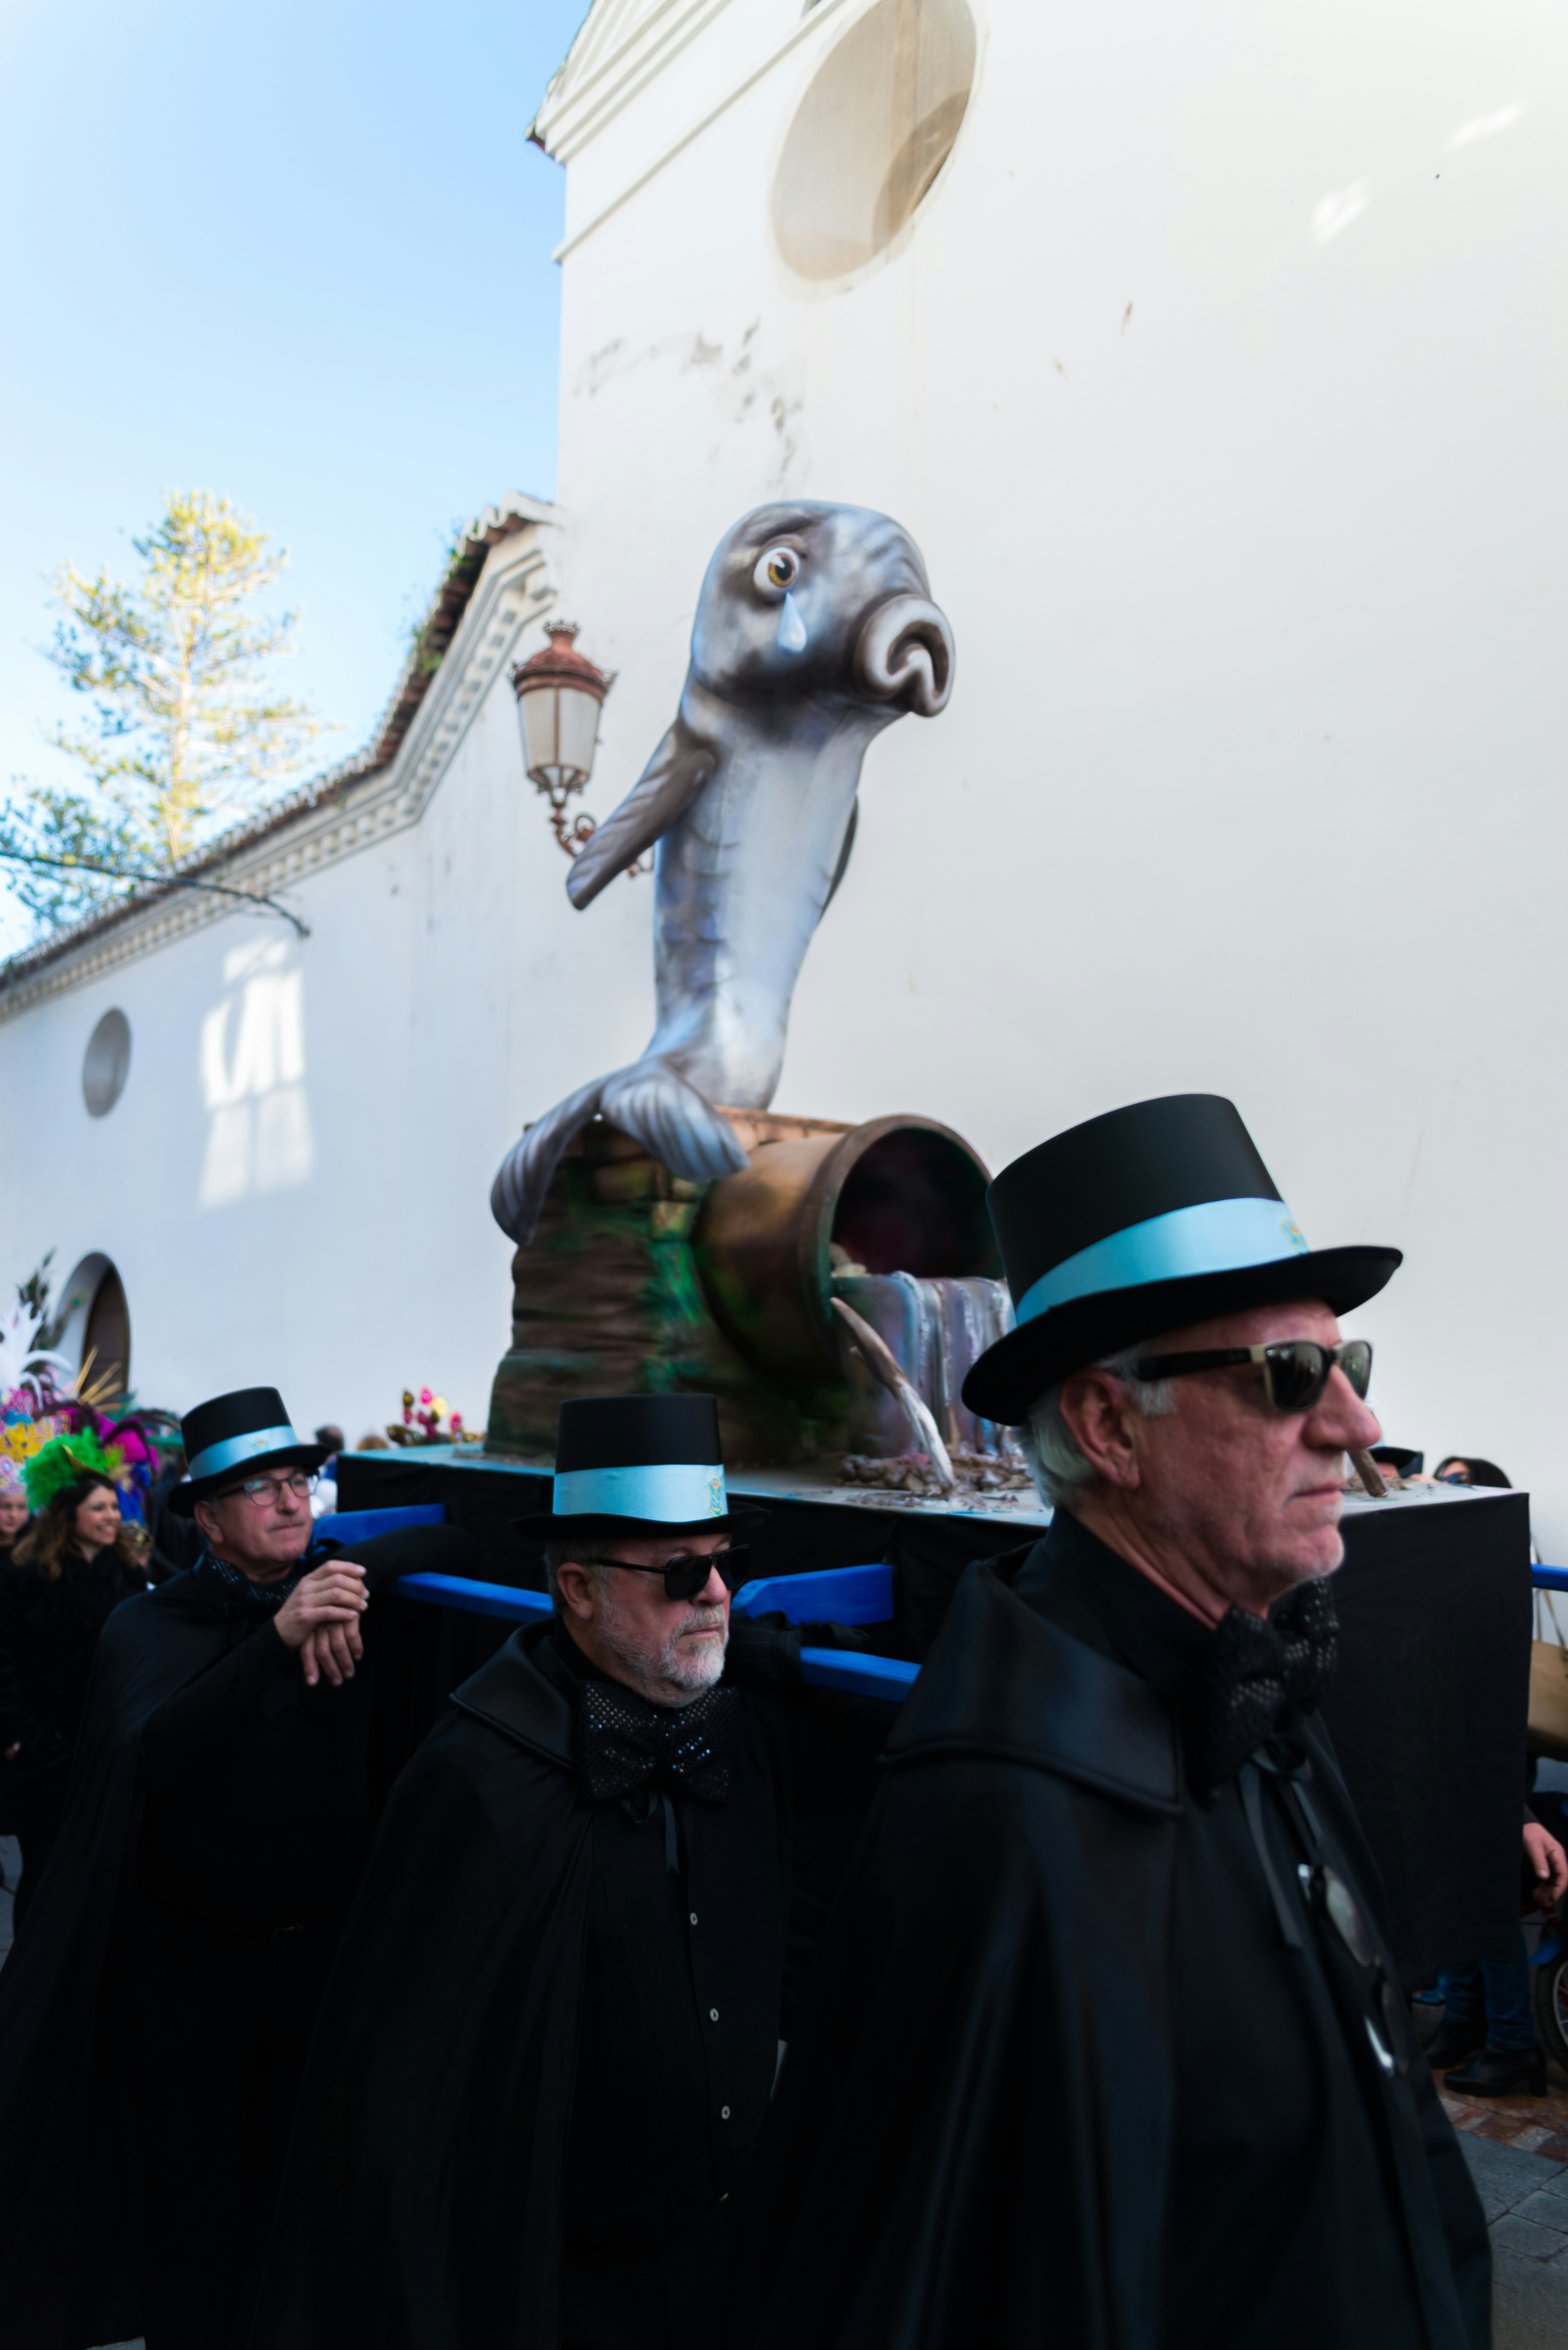 An effigy of a weeping sardine is carried by people dressed in black in a procession during the Burial of the Sardine at Carnival in Spain.